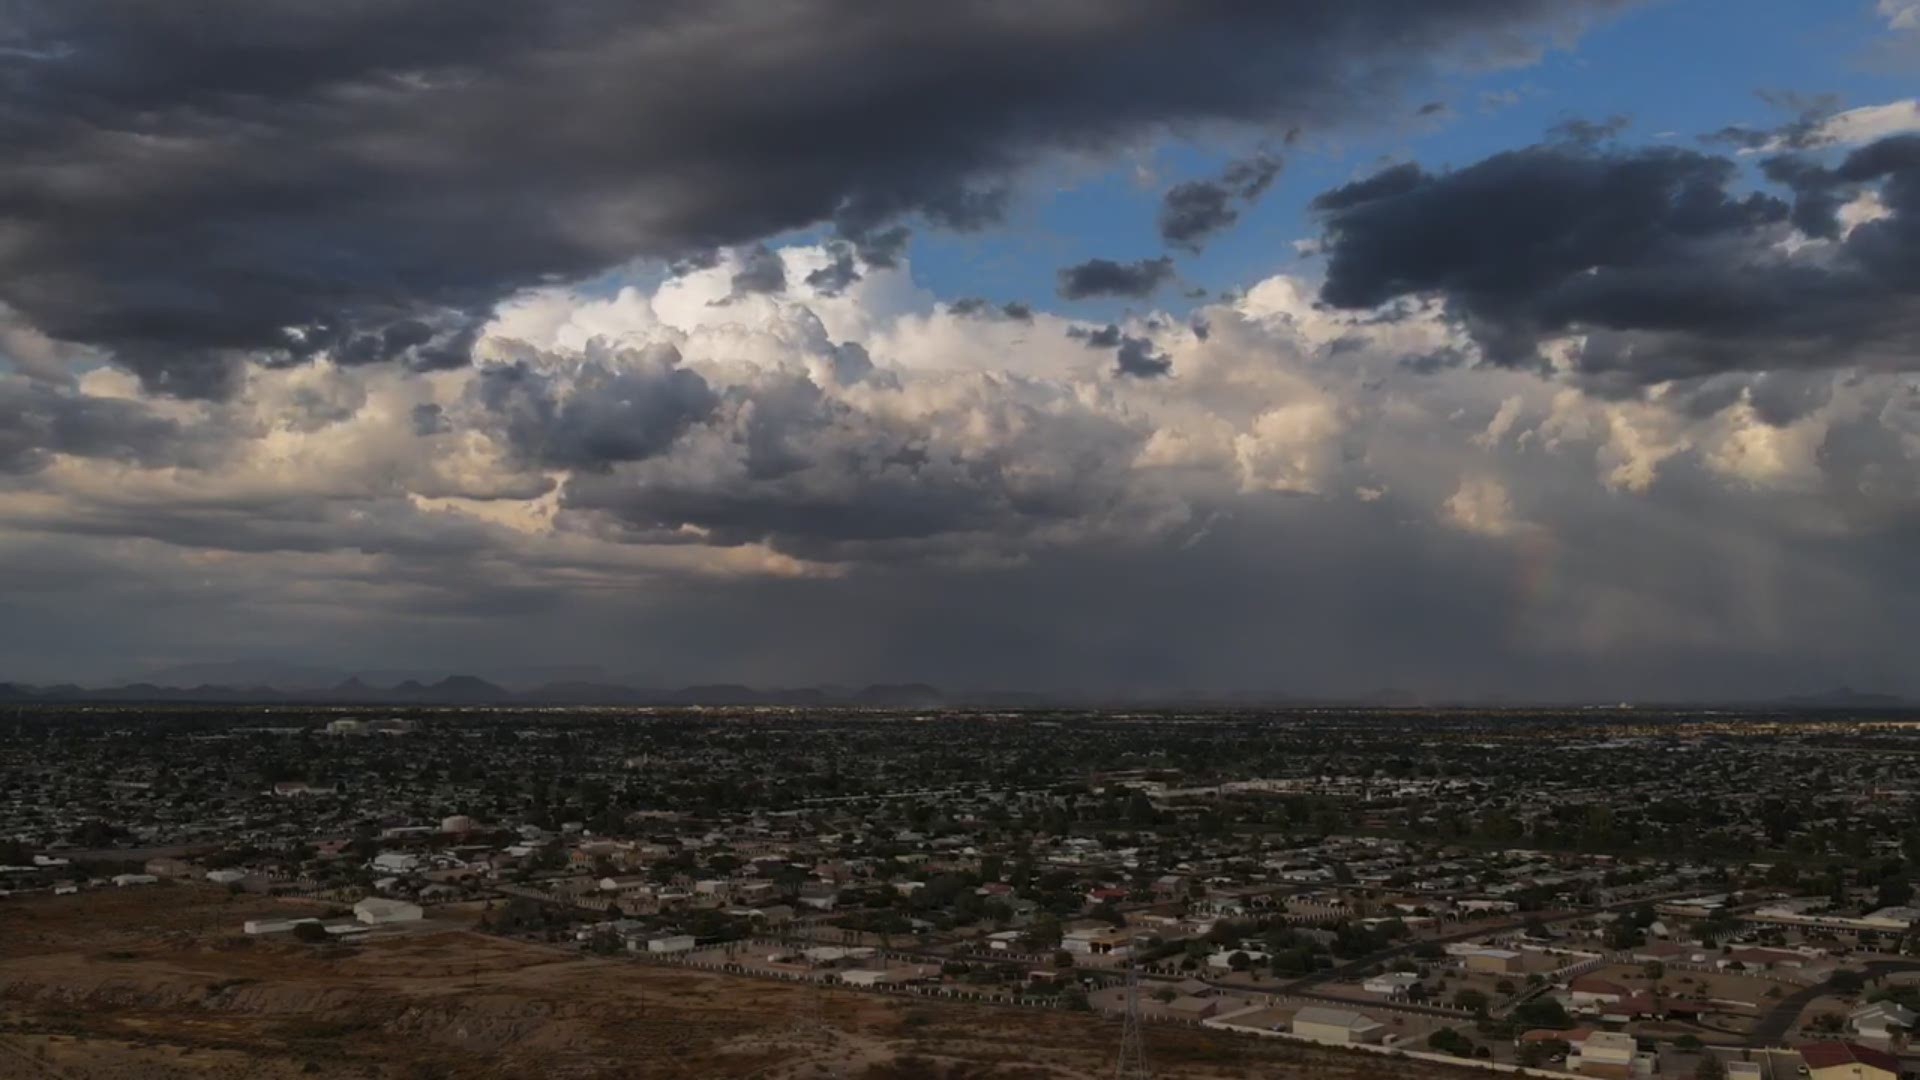 Monsoon 2020 drone looking east at storm cell near Cave Creek and Union Hills
Credit: Jon Wickins